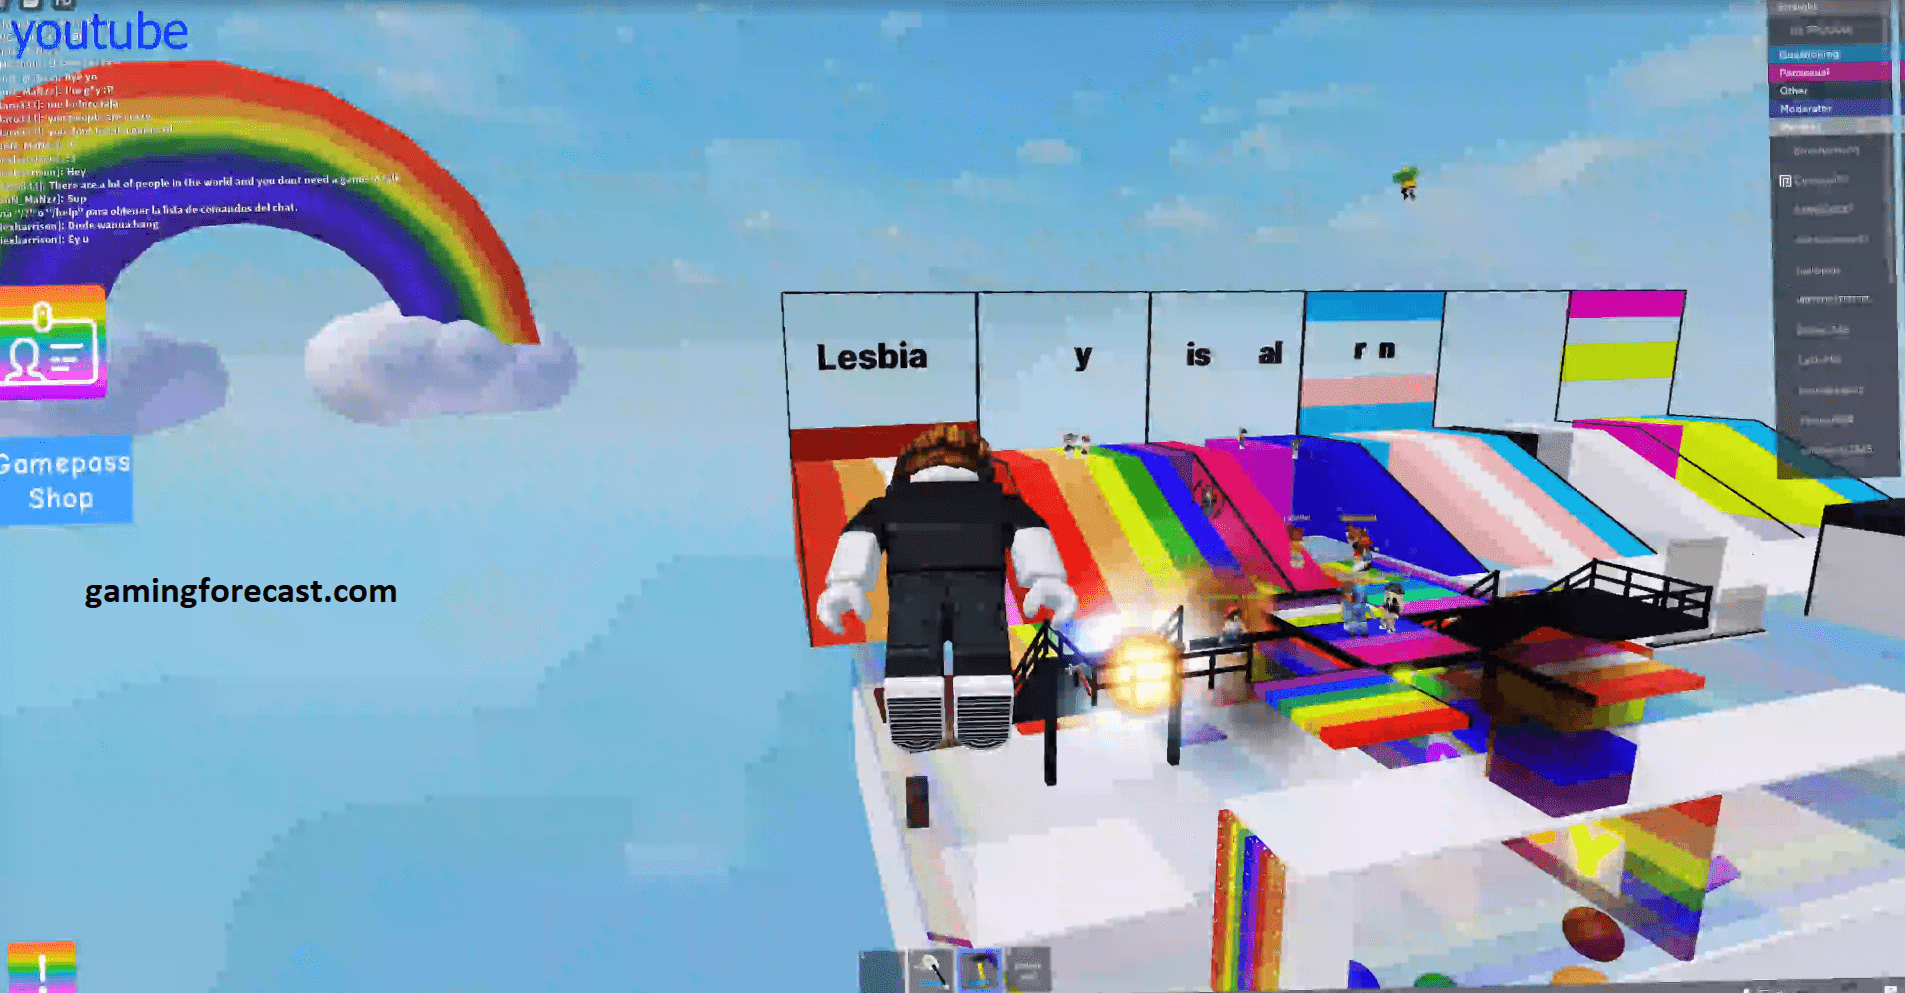 Roblox Hack Download Pc Destroy Lobby Fly Aimbot Scripts 2021 Gaming Forecast Download Free Online Game Hacks - roblox ios cheats